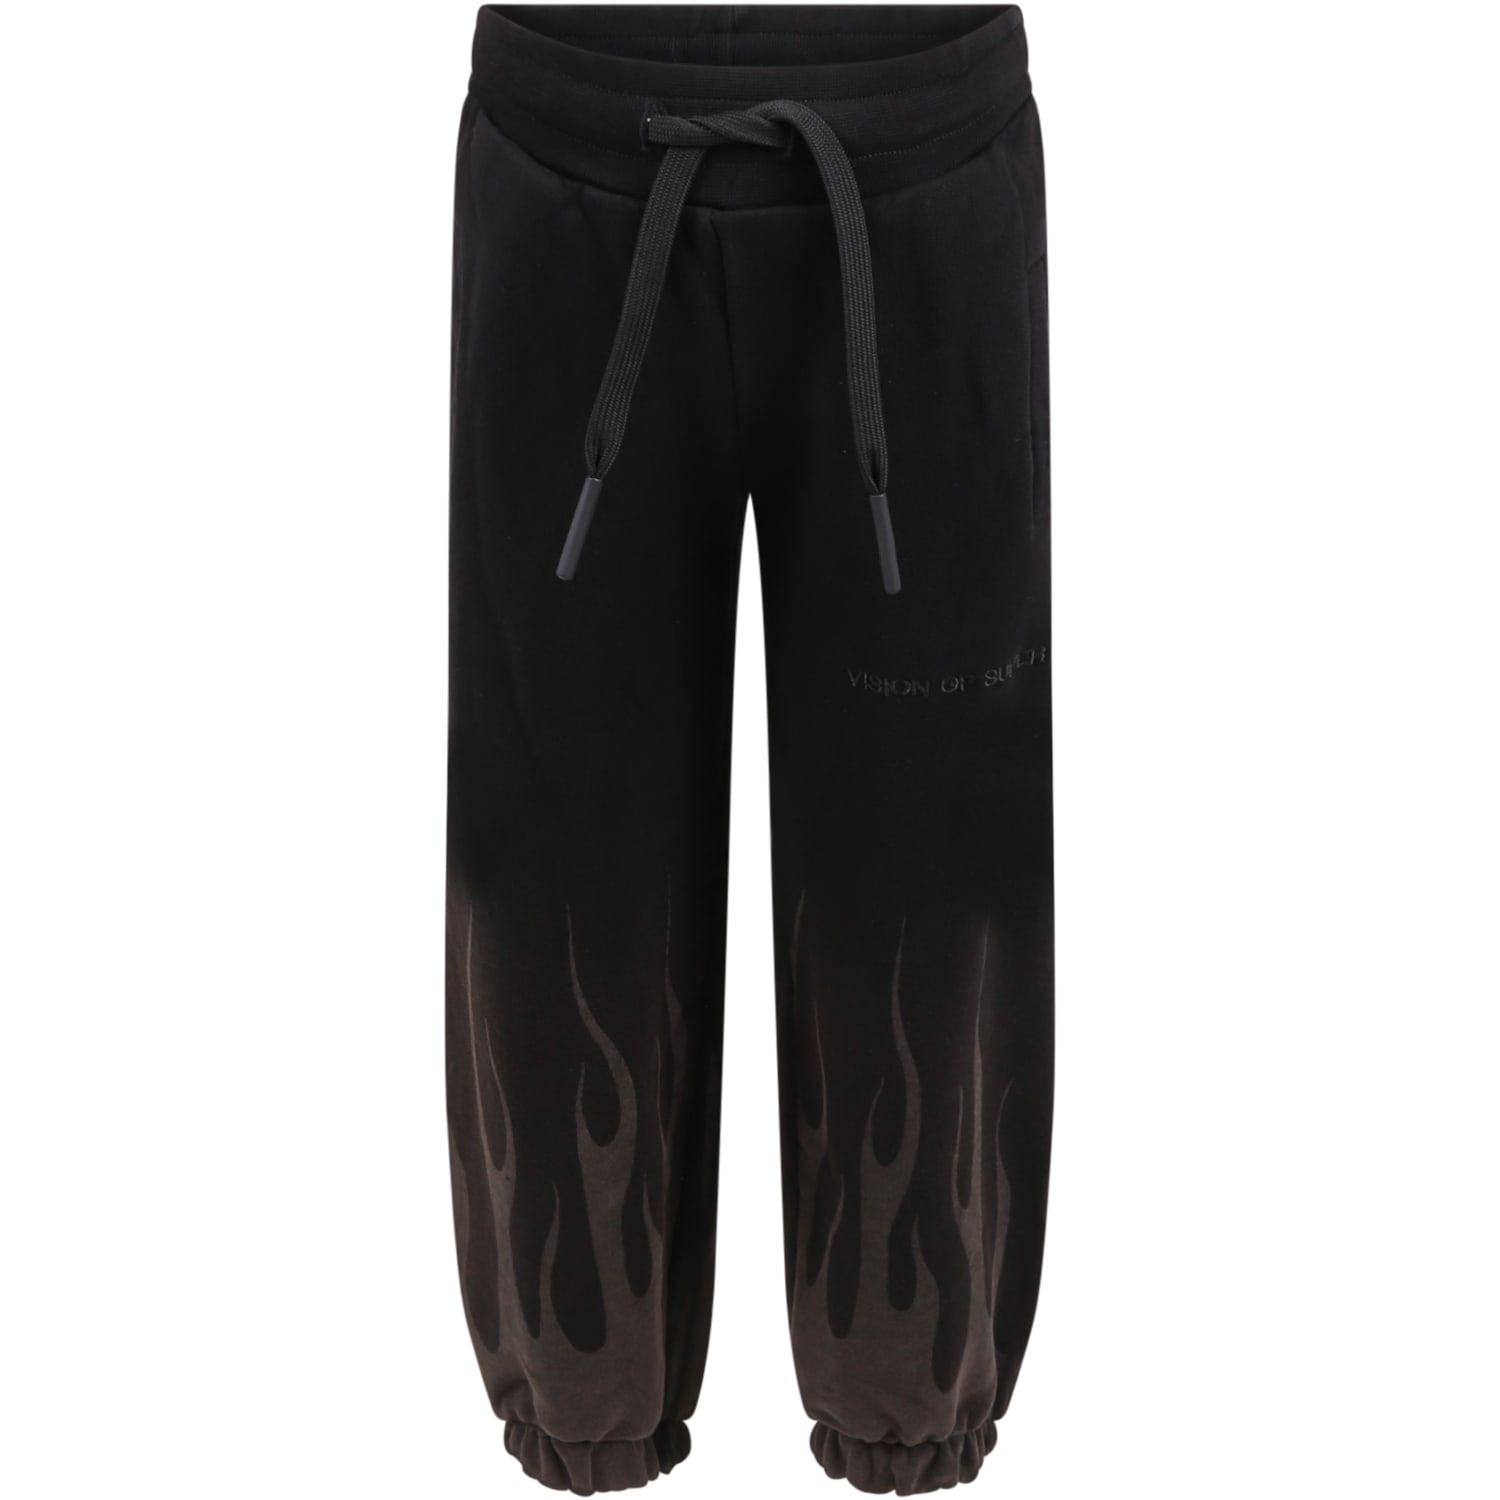 Vision of Super Black Sweatpants For Boy With Flames